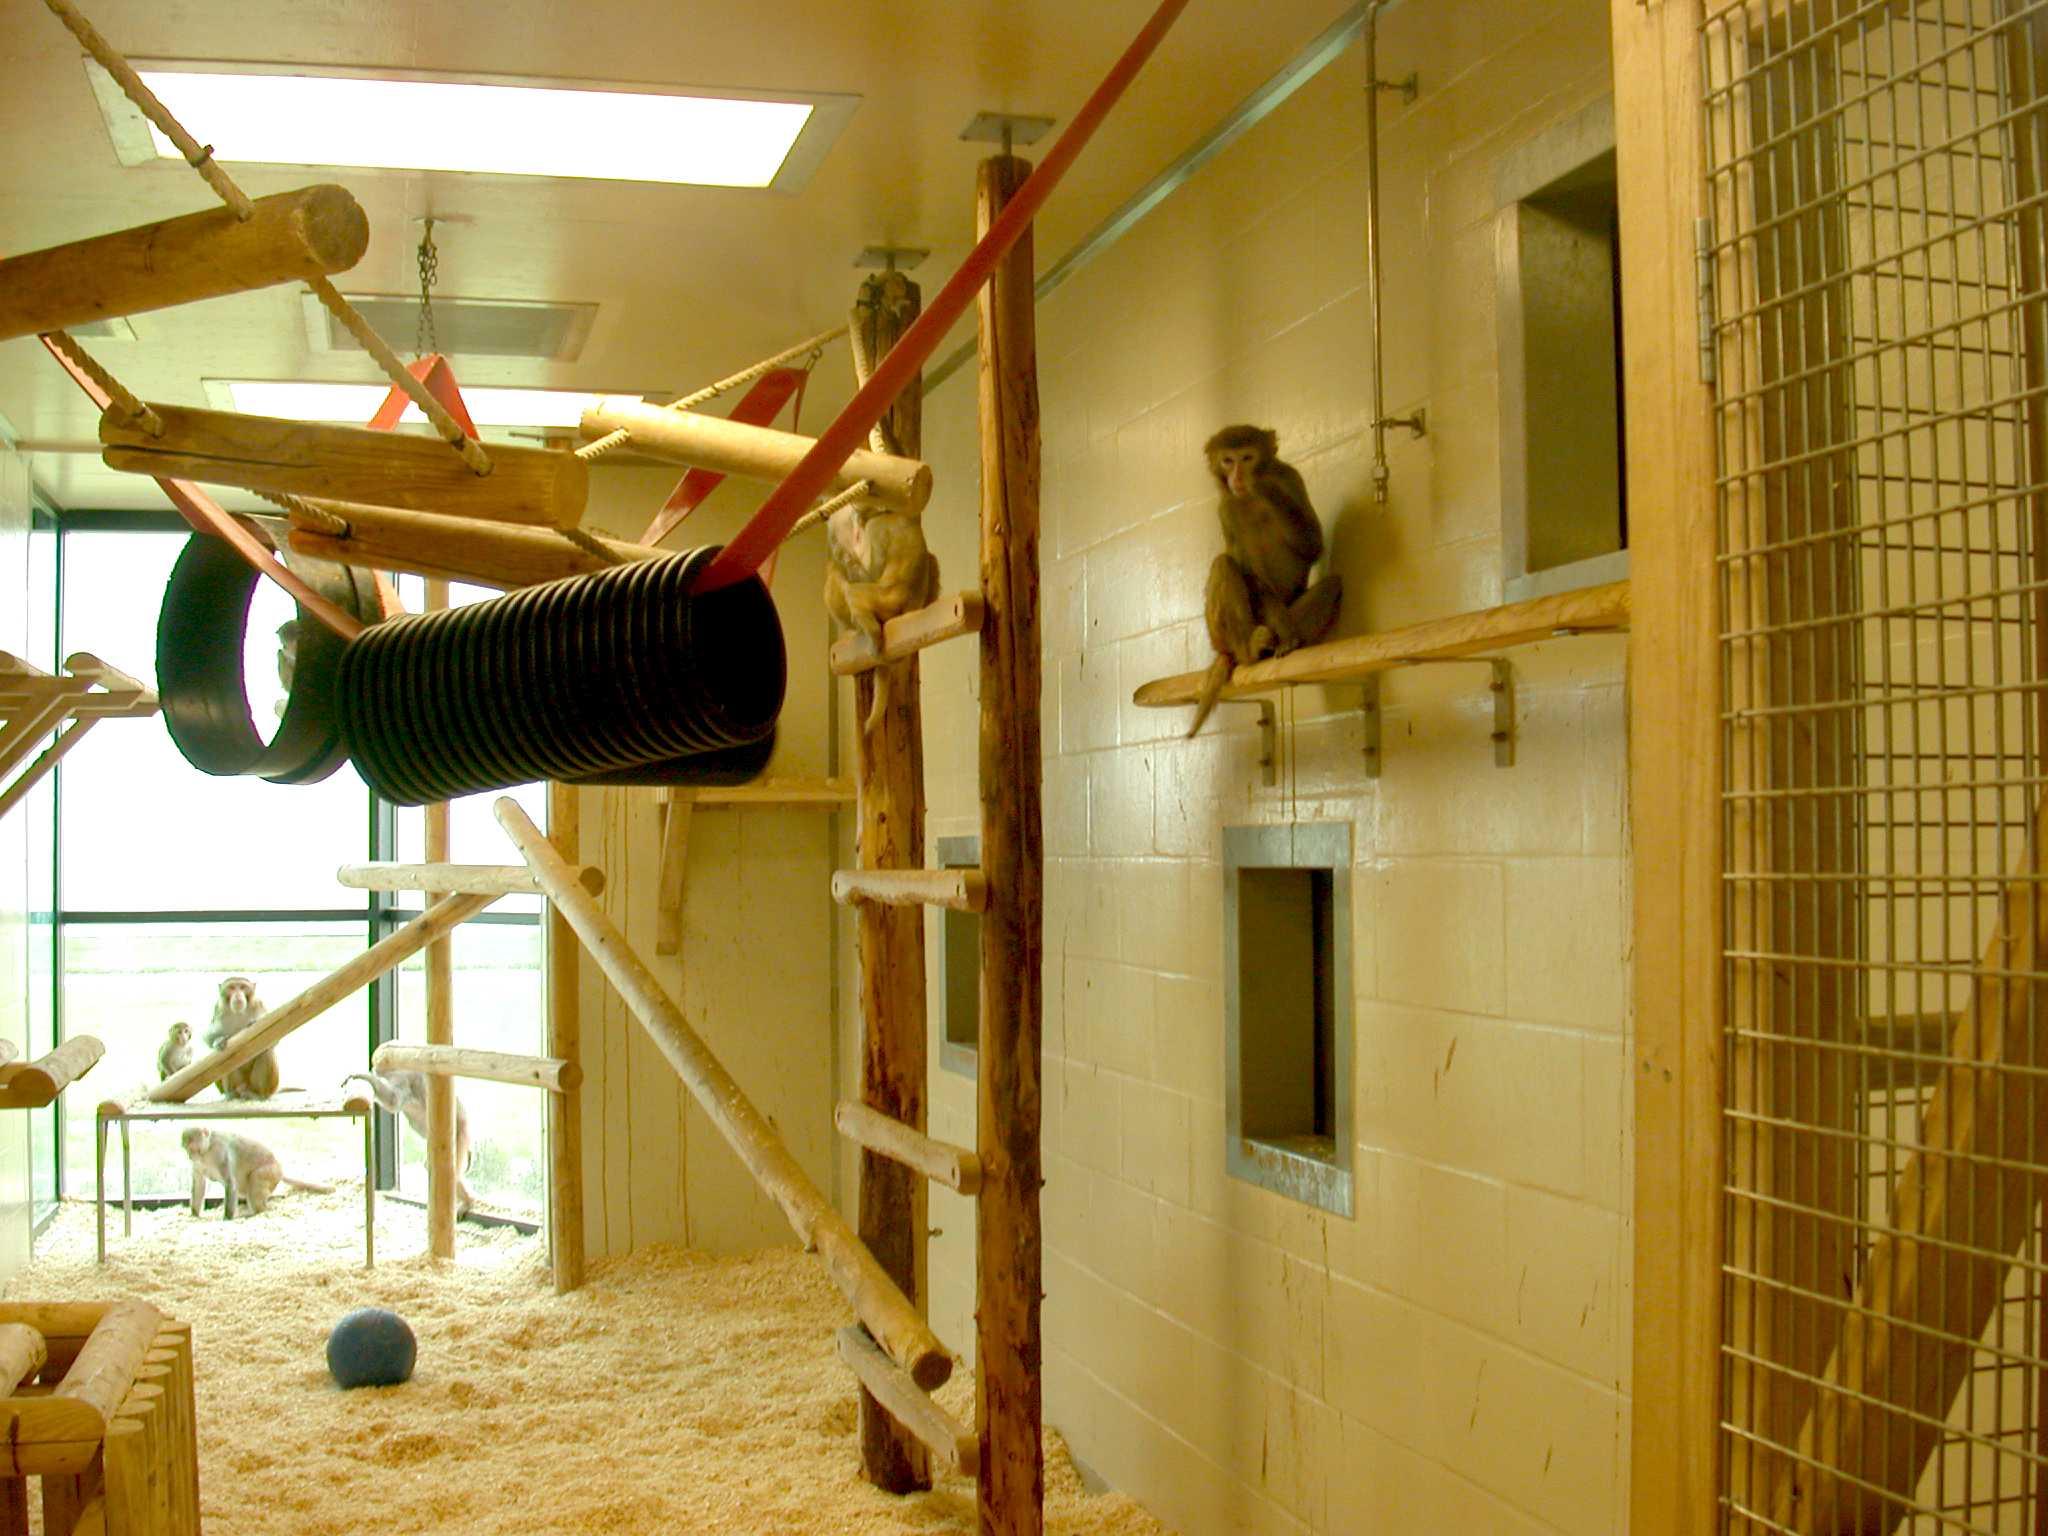 An example of an indoor enclosure that is a somplex and stimulating space with various wooden perches and ladders and manulipulatable enrichment. The space is large enough for macaques to run , climb, swing, jump, flee upwards and hide from dominant animals or humans